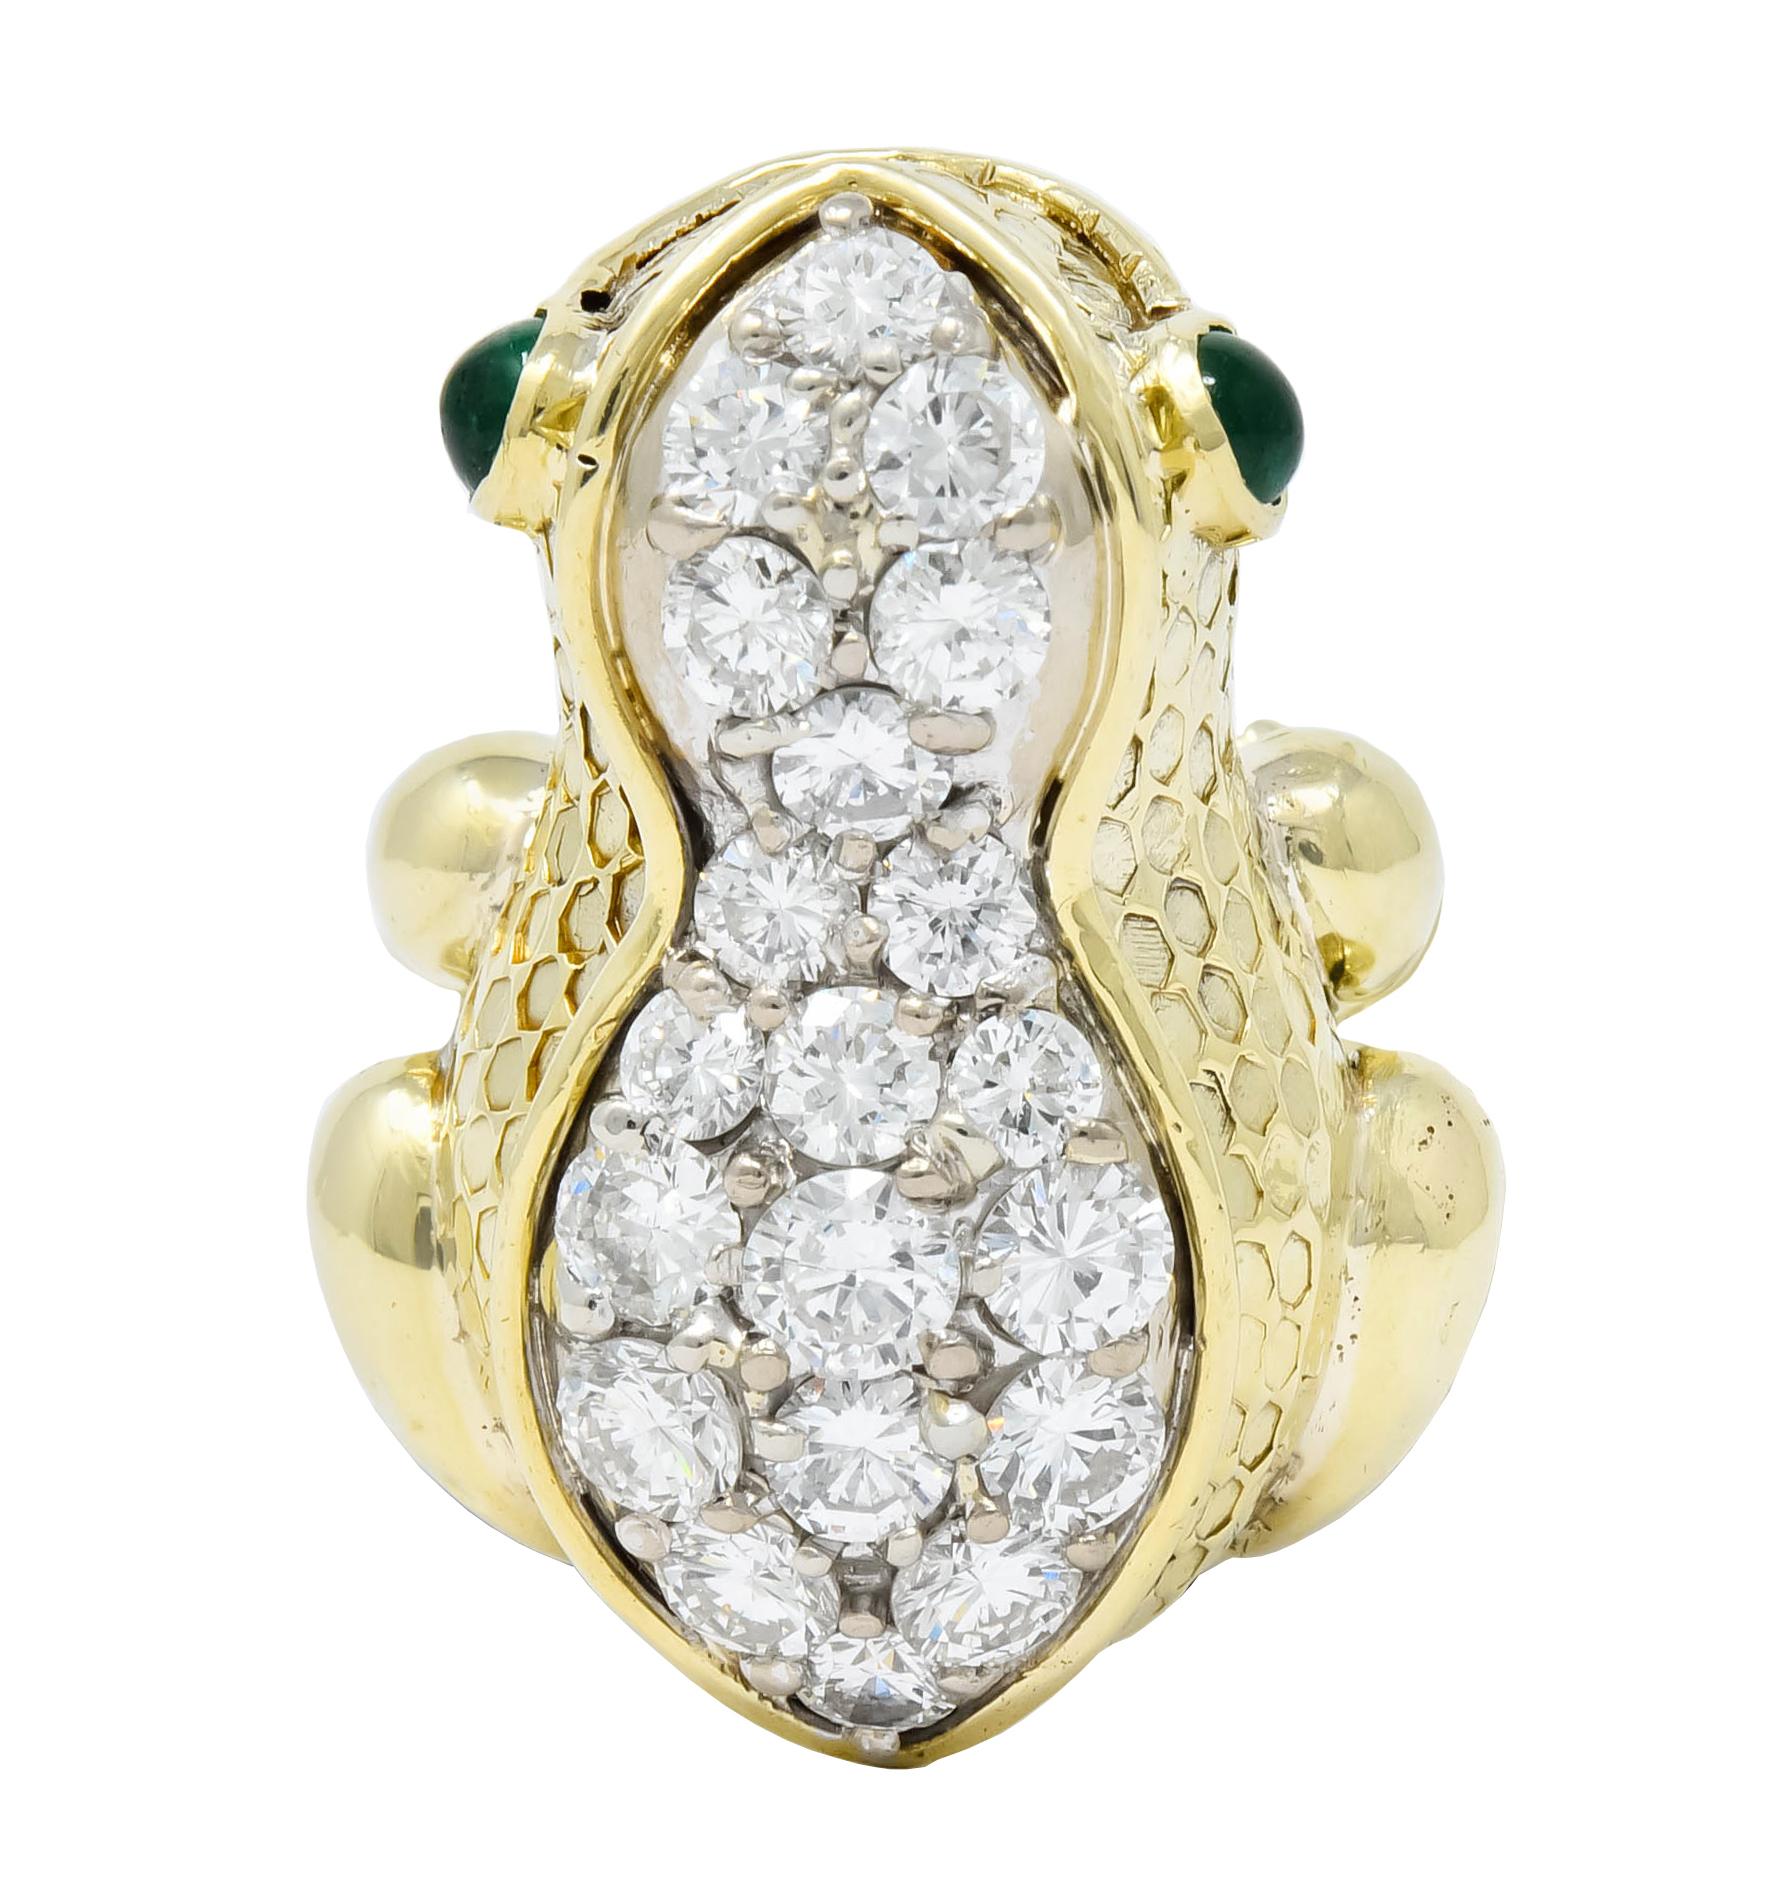 Ring designed as a perched, smiling frog featuring round emerald cabochon eyes and a deeply textured scale-like finish

With a pavé field back set throughout with round brilliant cut diamonds weighing approximately 2.75 carats total, G/H color and